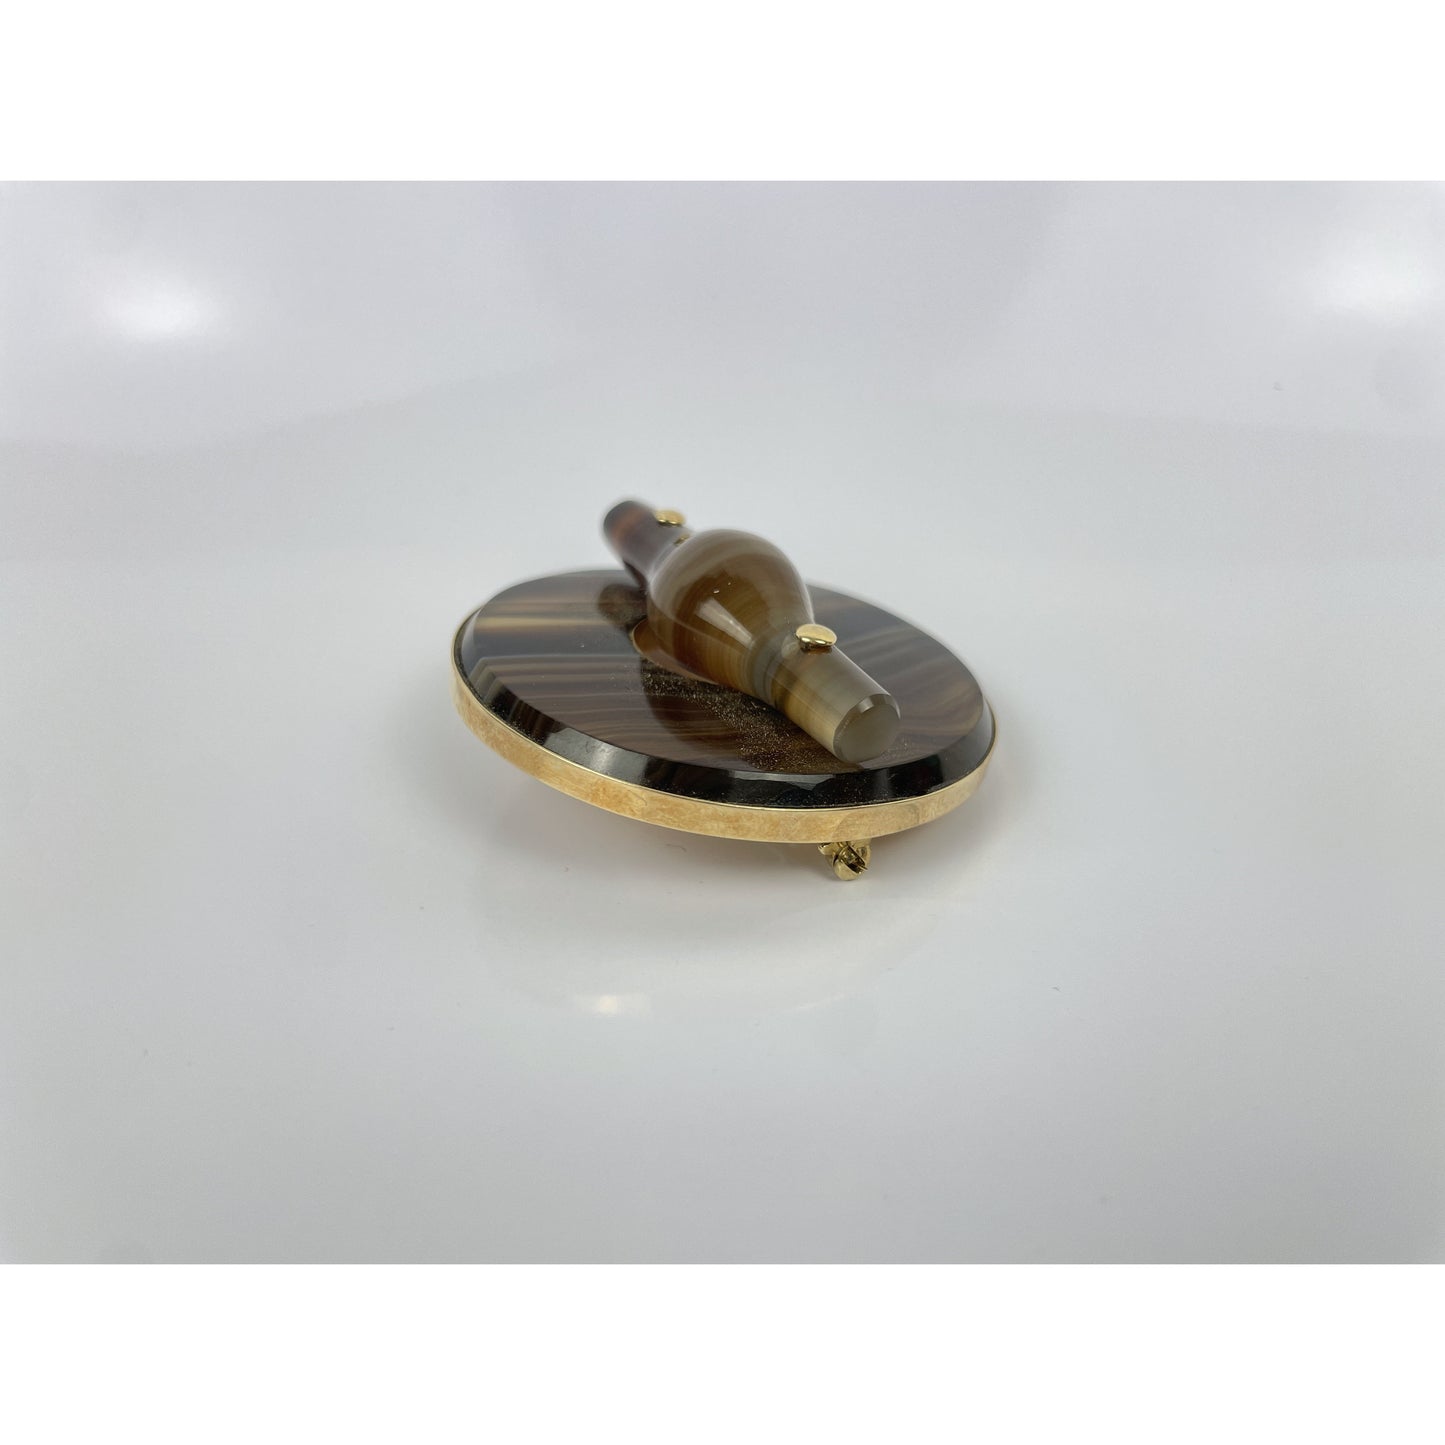 14k Gold Banded Agate Brooch Pin